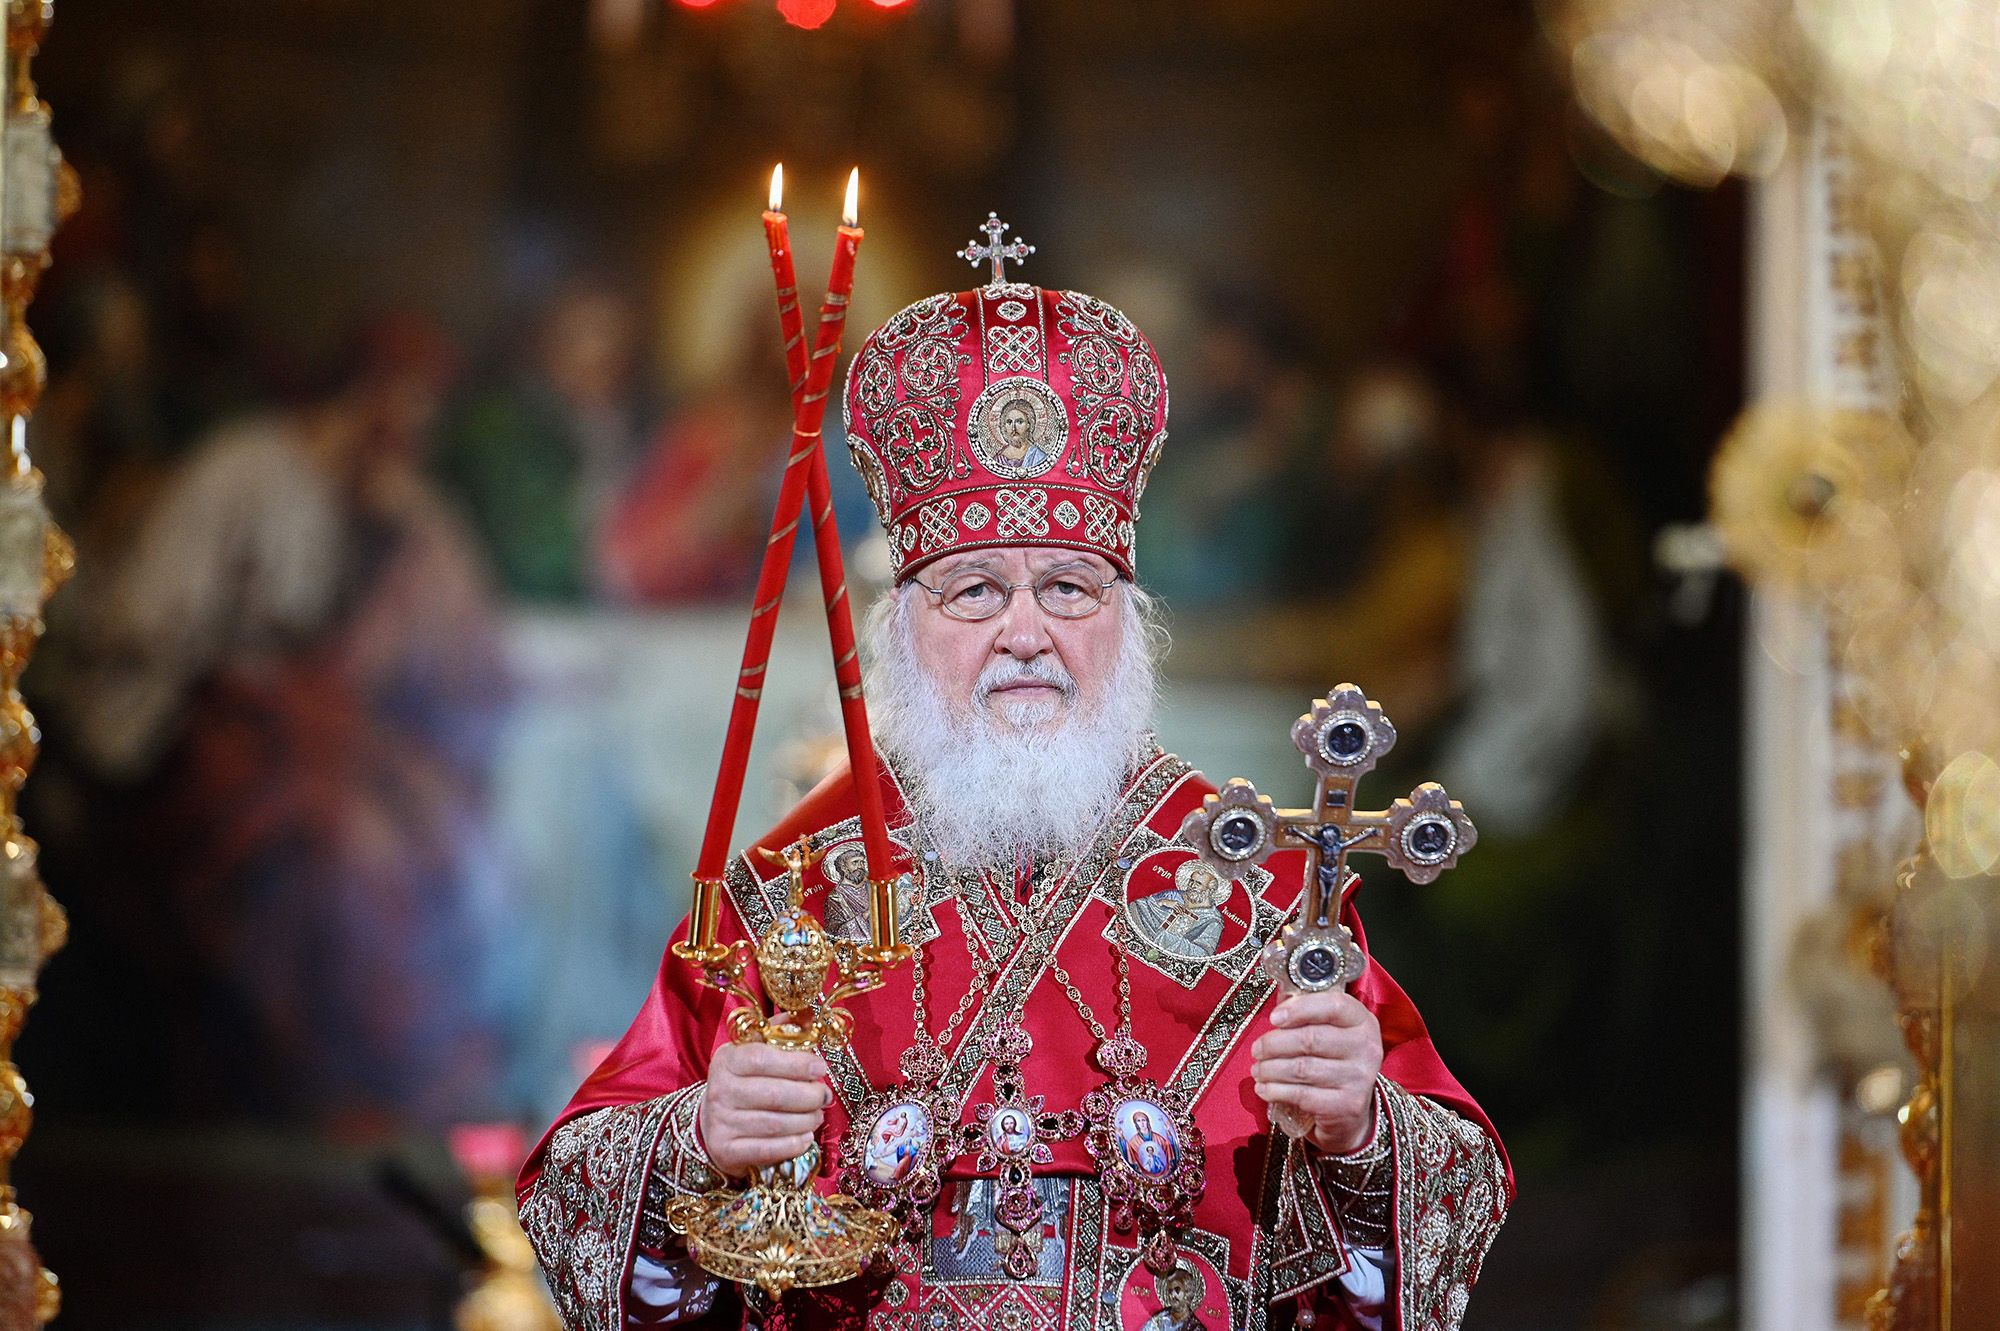 Russian Orthodox Patriarch Carol celebrates Easter on April 19, 2020 at Christ the Savior Cathedral in Moscow, Russia.